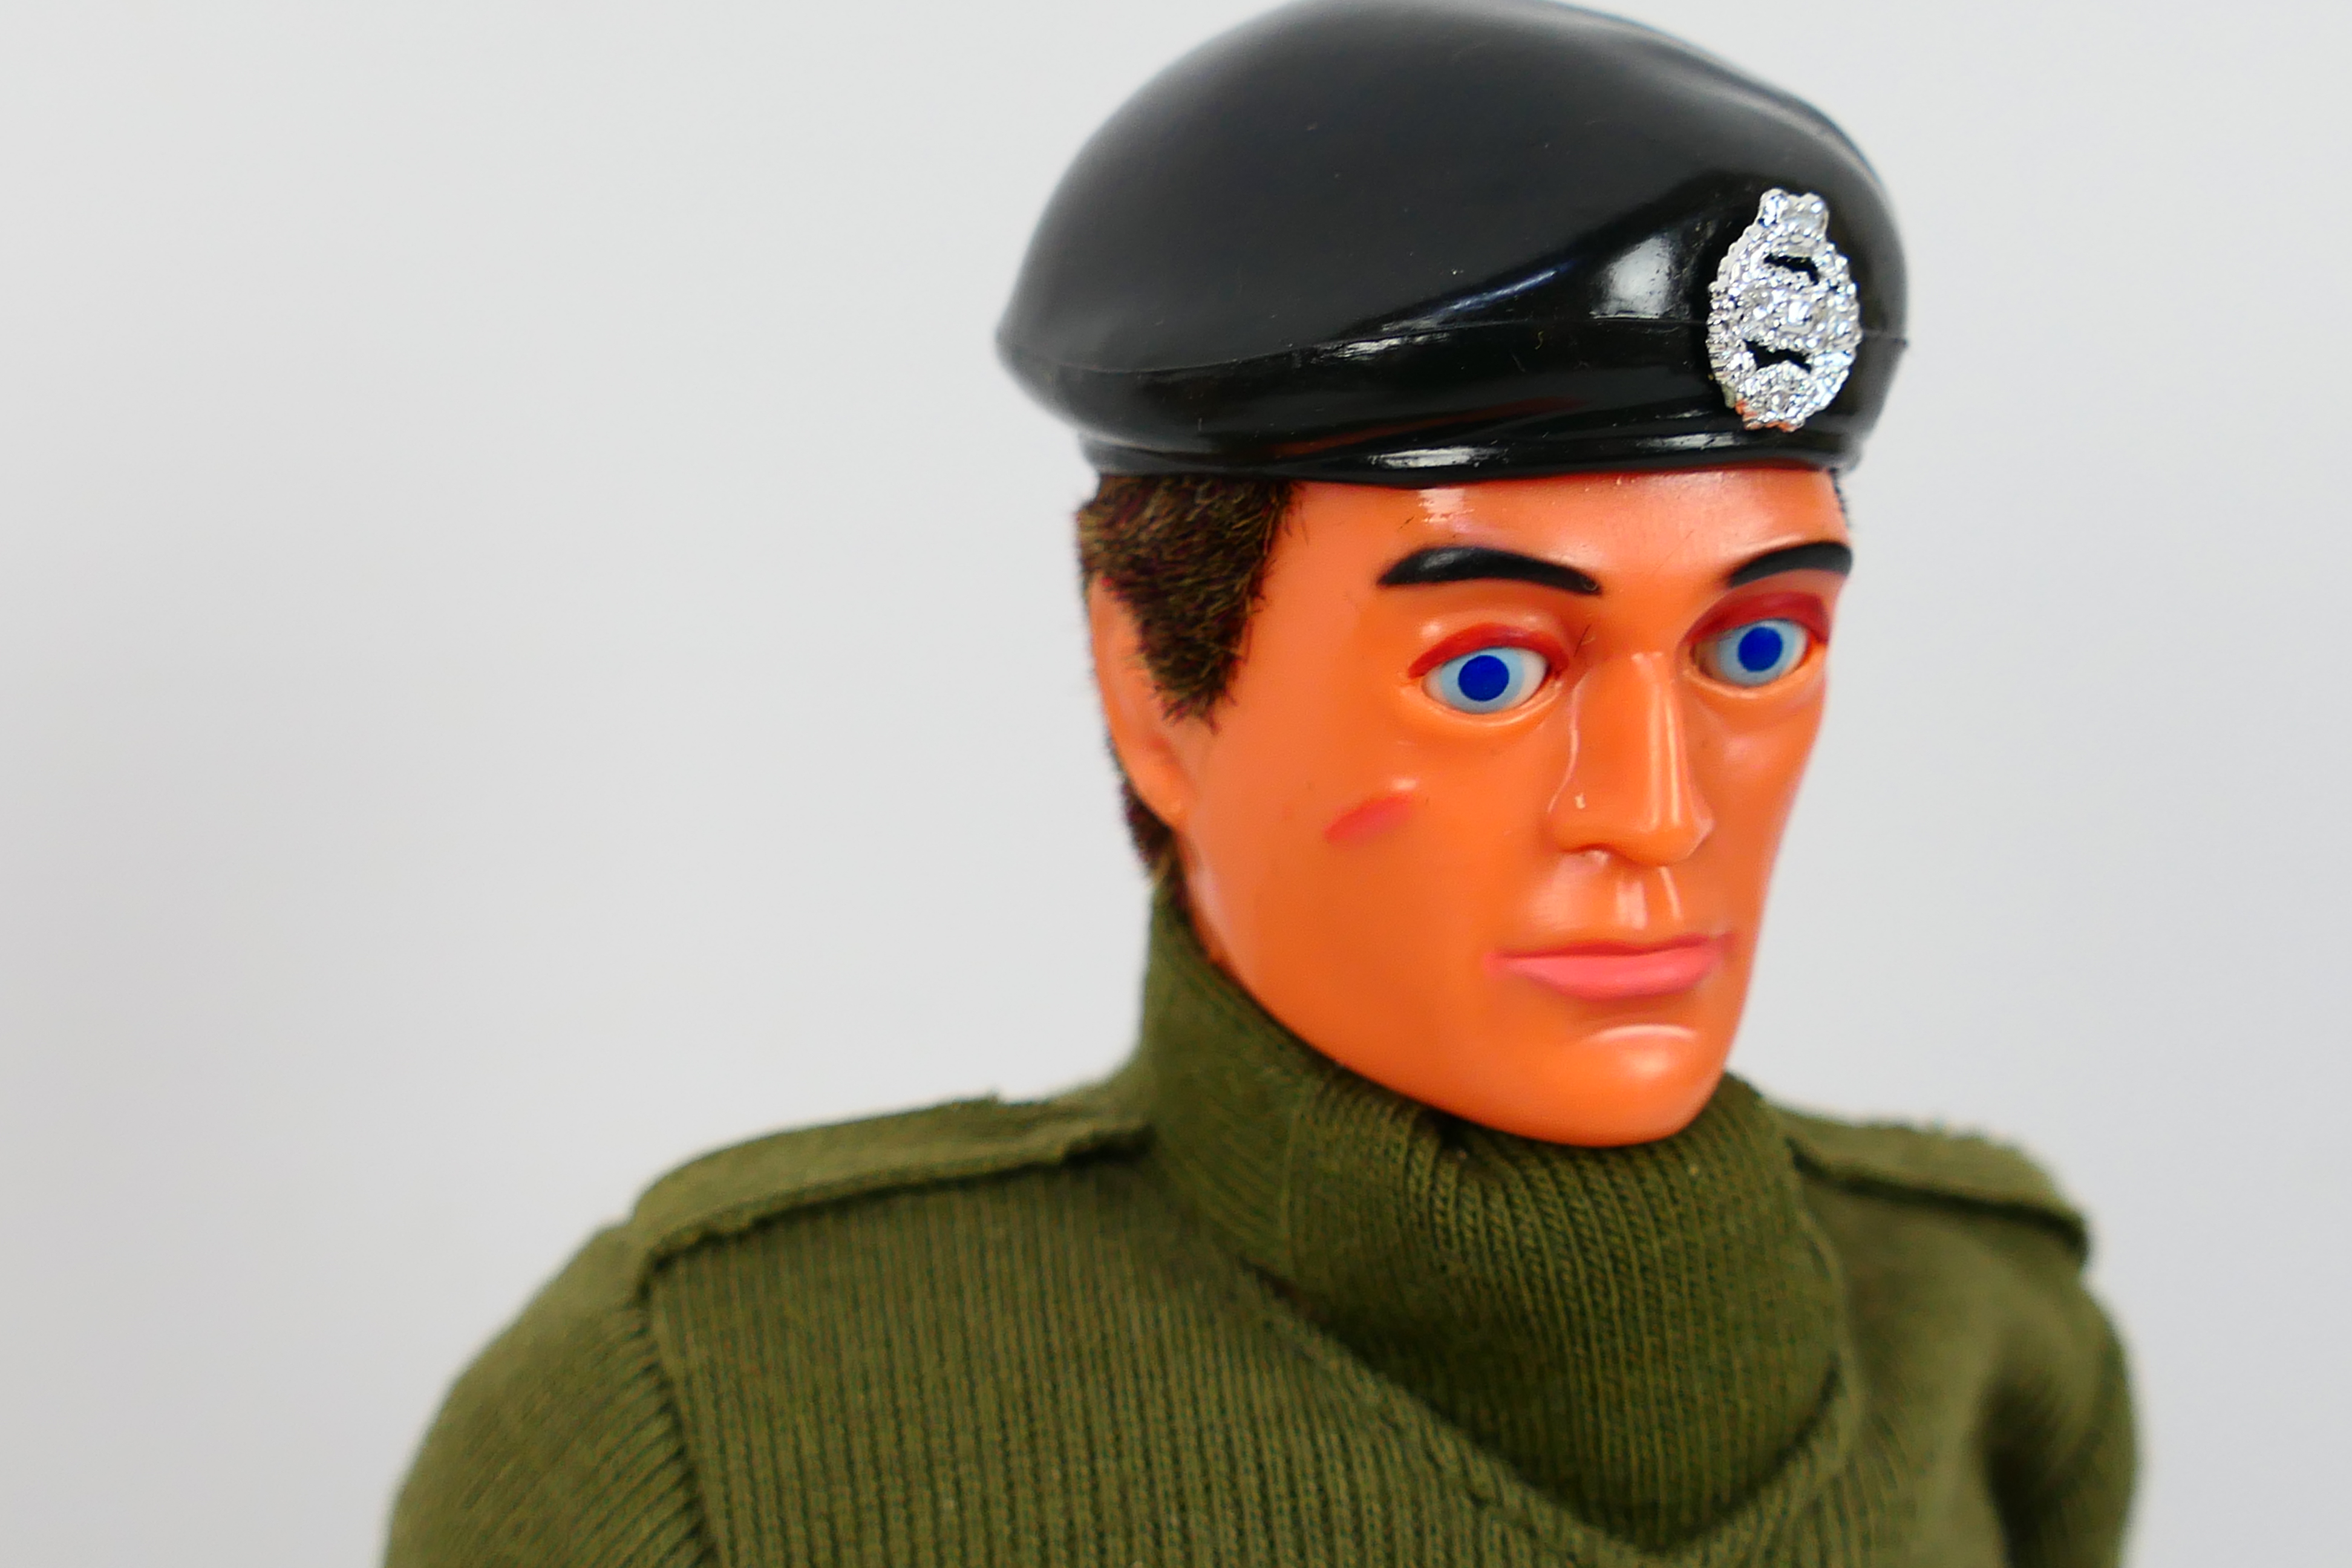 Hasbro - Action Man - A 40th Anniversary Eagle Eye Action Man Soldier. - Image 8 of 8